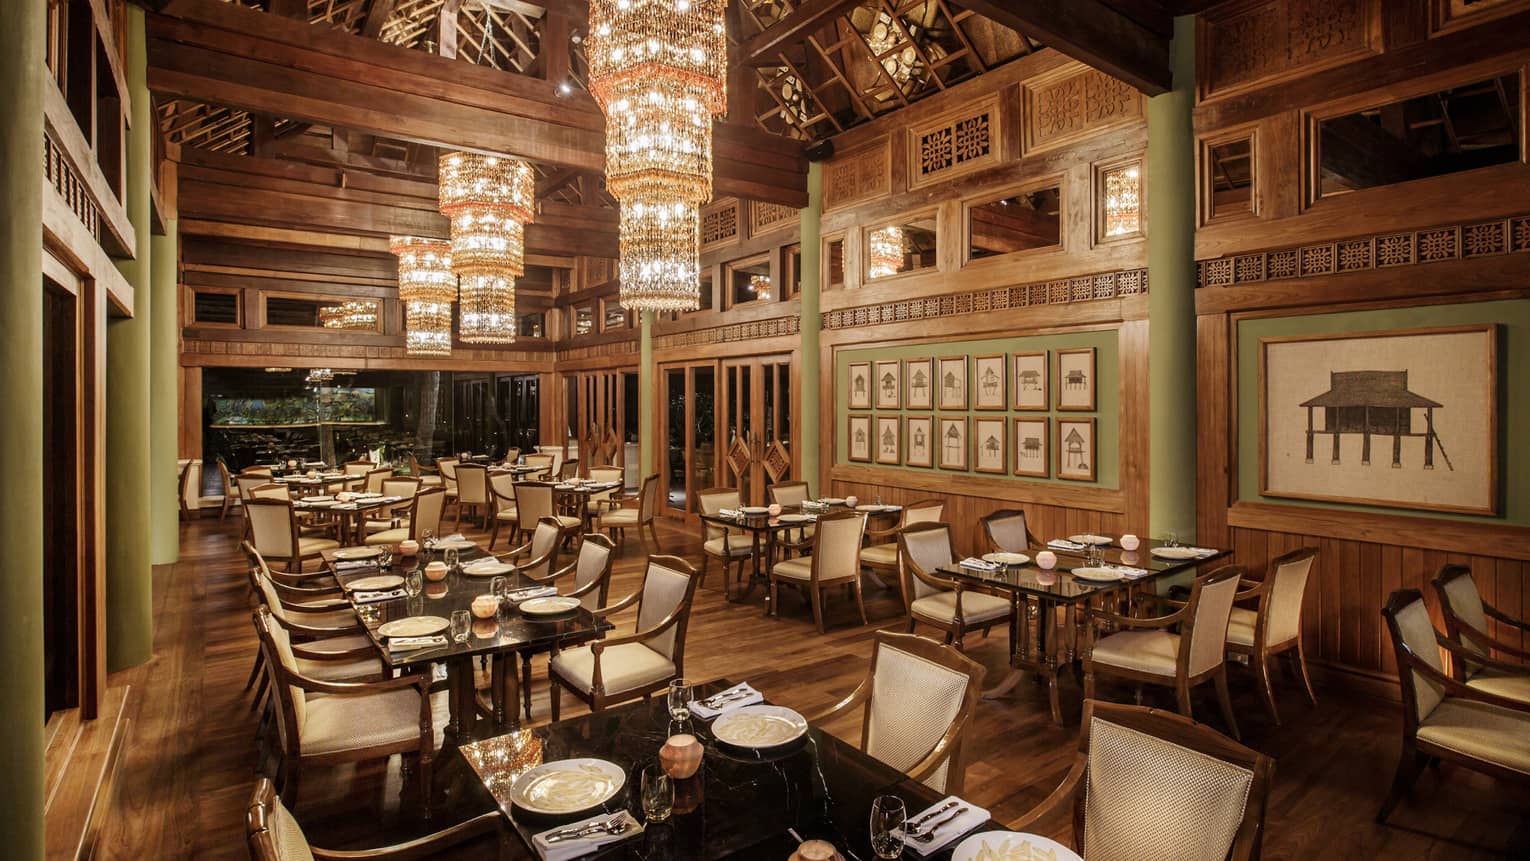 Long crystal chandeliers hang from high ceilings over KHAO indoor dining room with wood decor